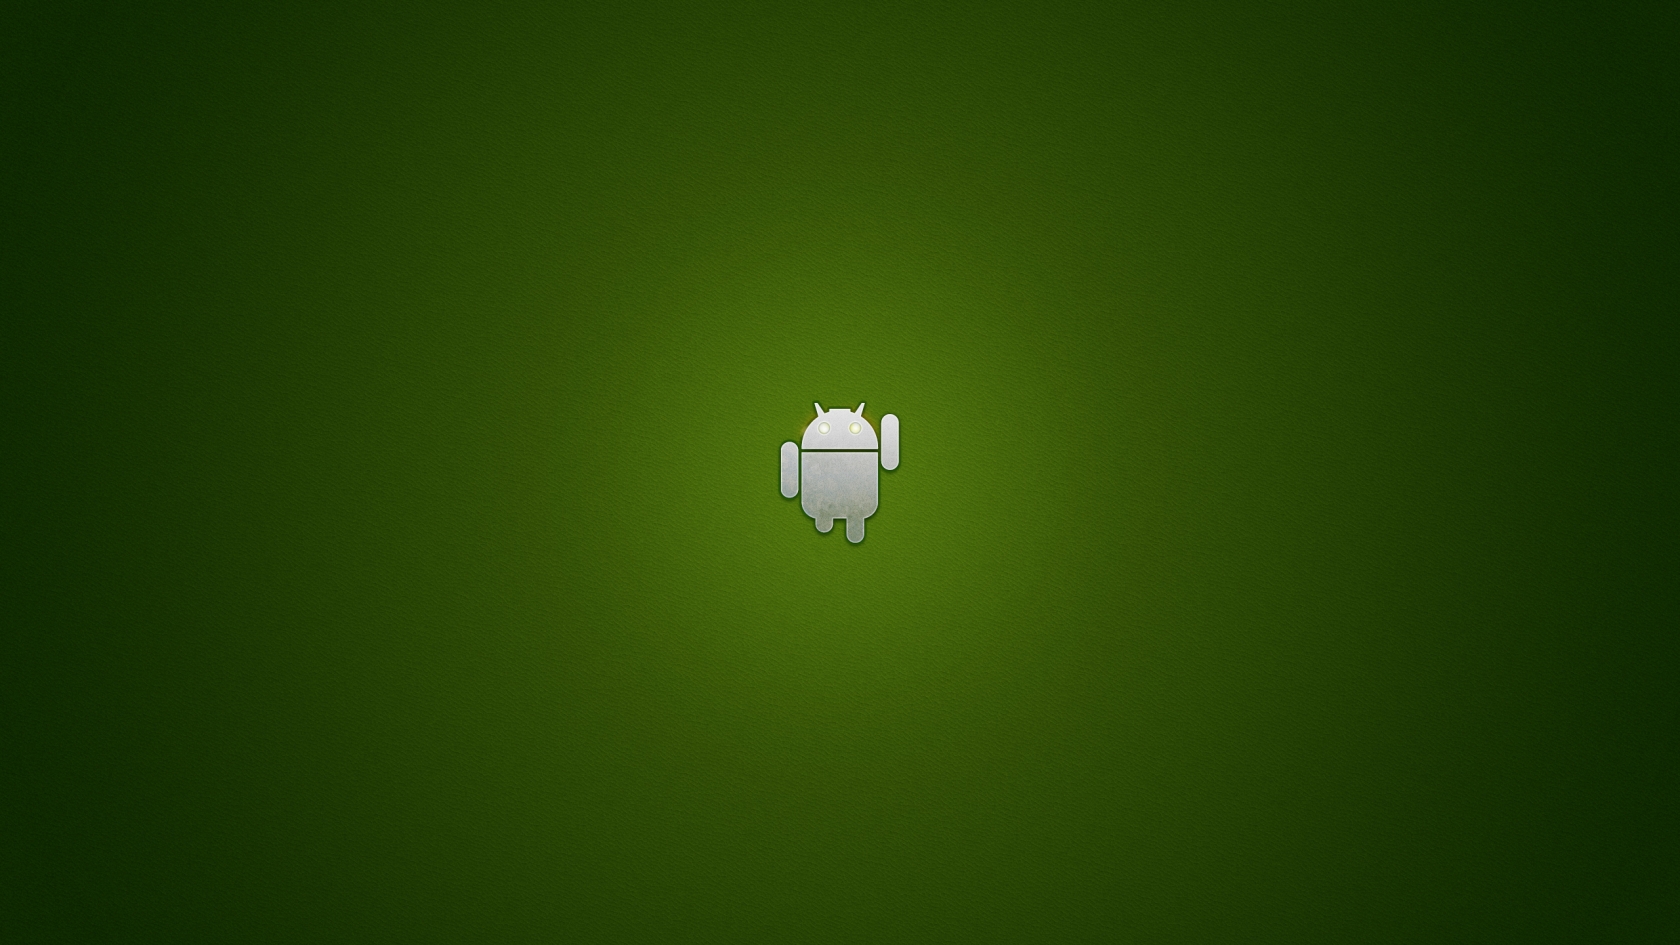 Just Android for 1680 x 945 HDTV resolution